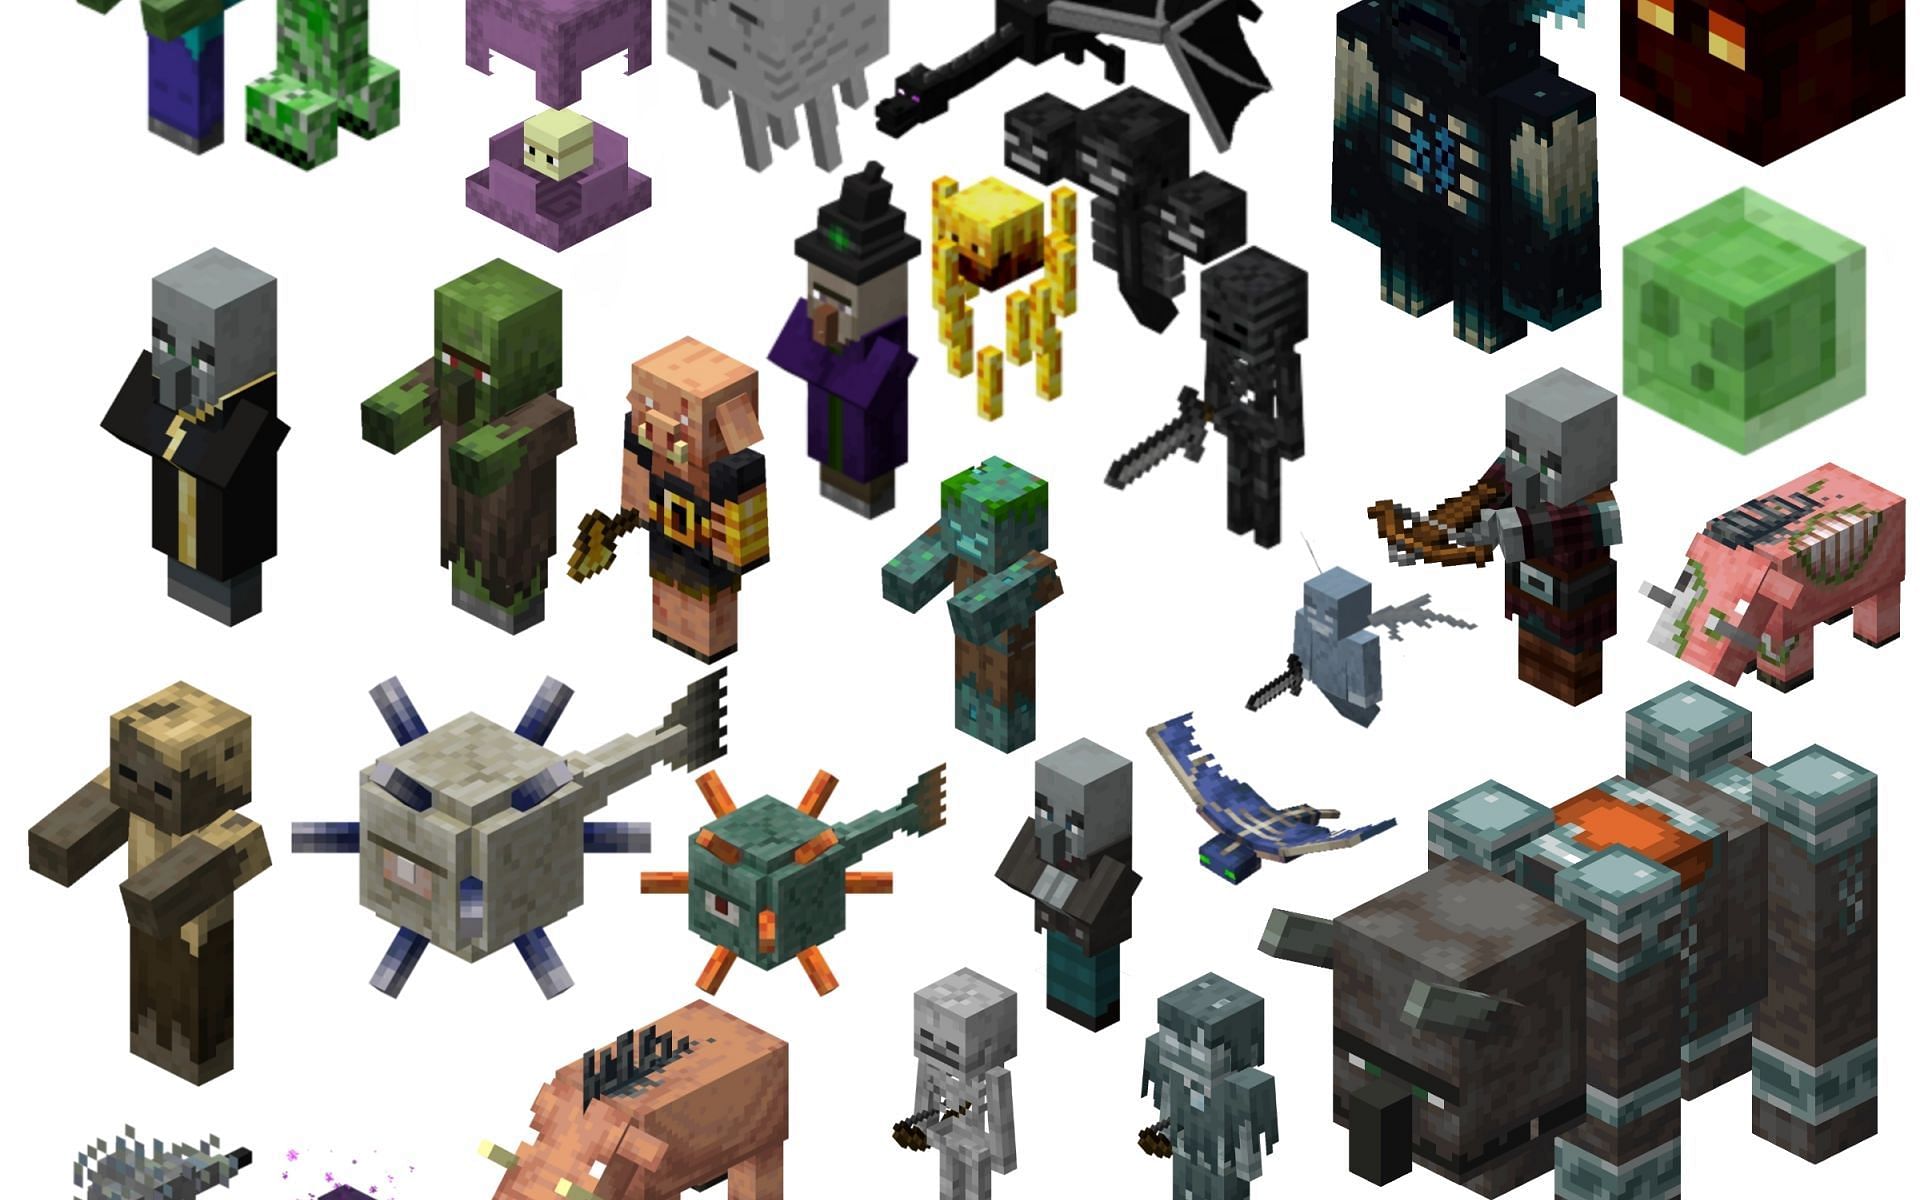 Most of the mobs in the game are untameable (Image via Villain Wiki)